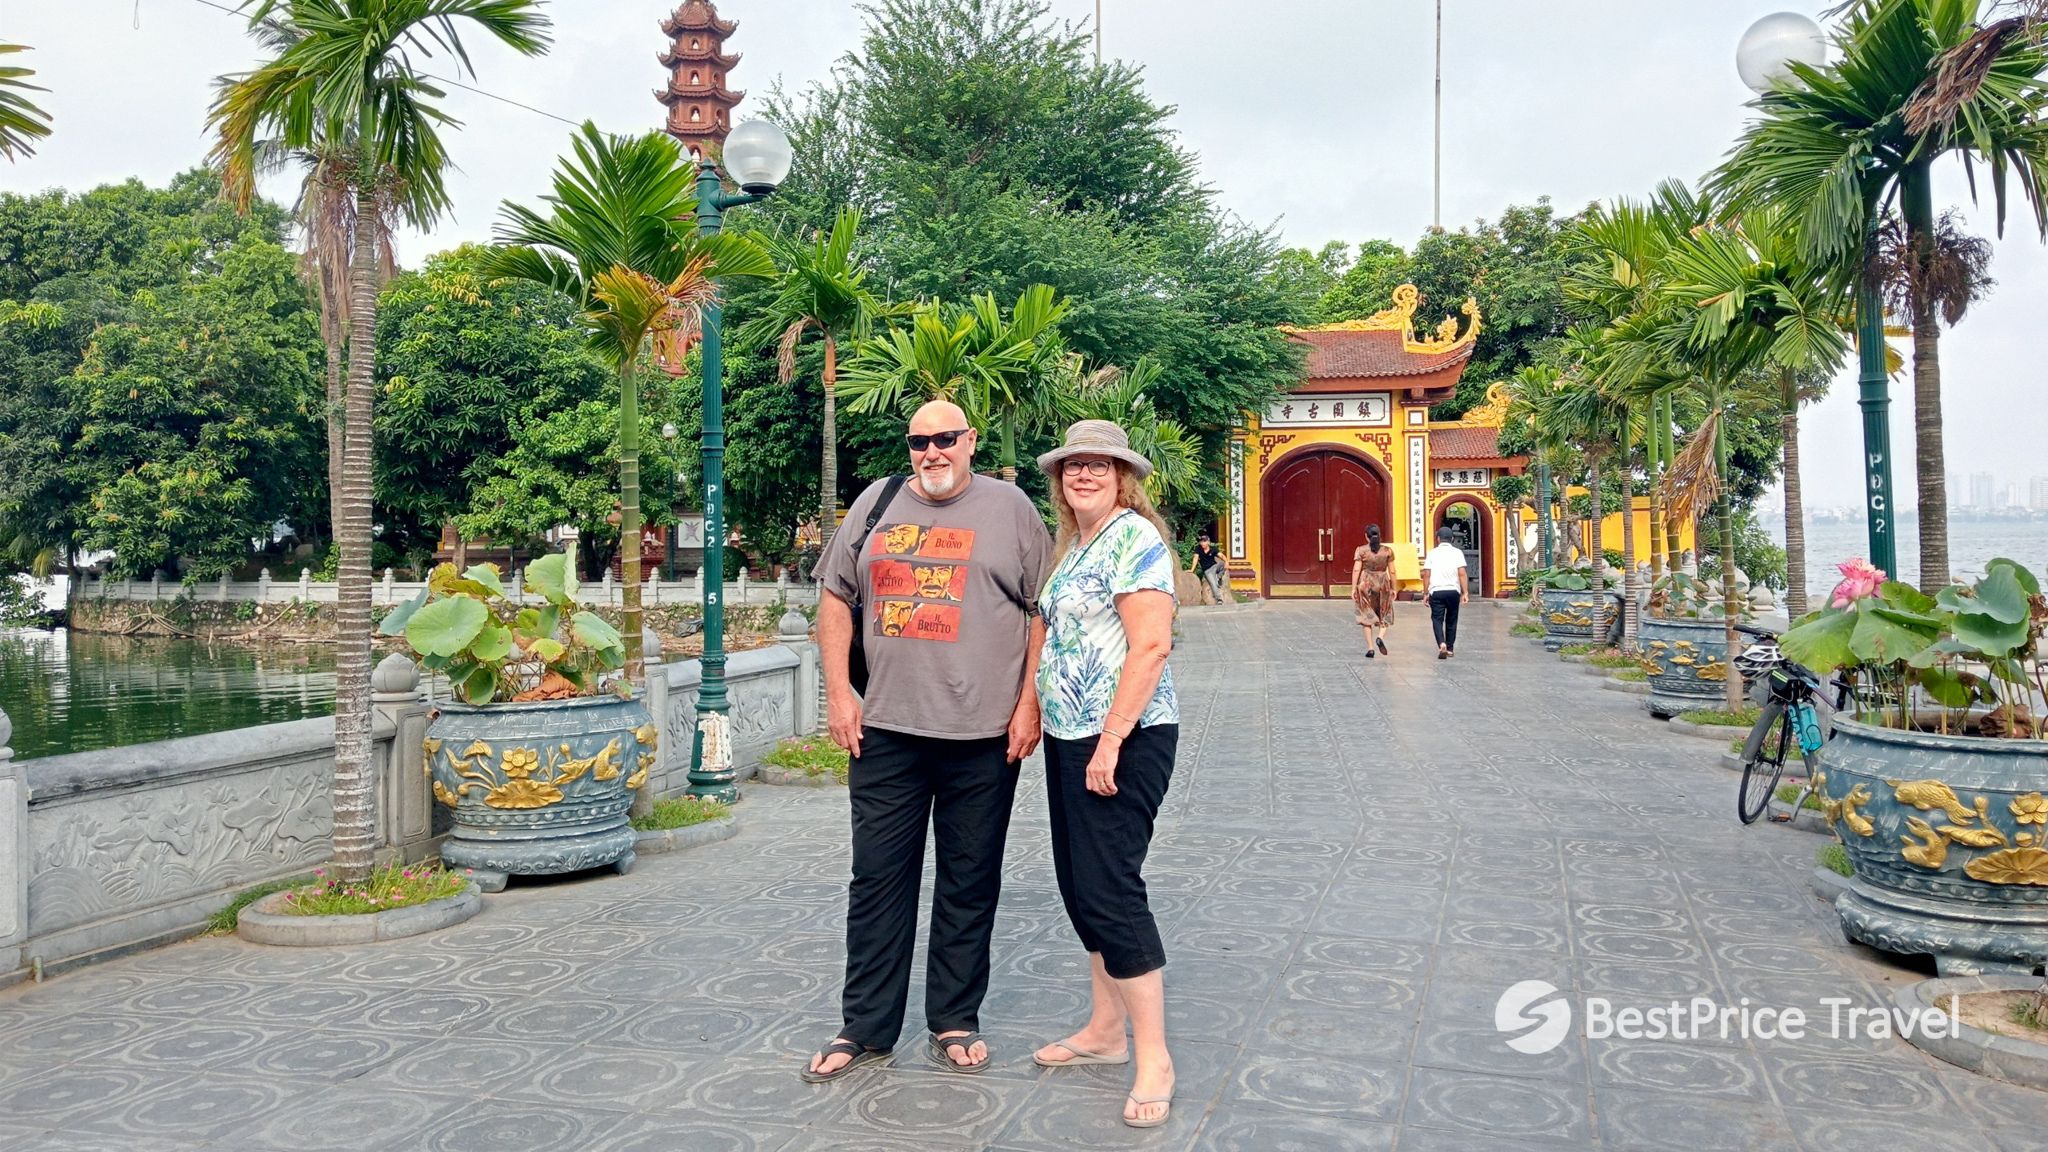 Day 2 Explore The Culture At Tran Quoc Pagoda